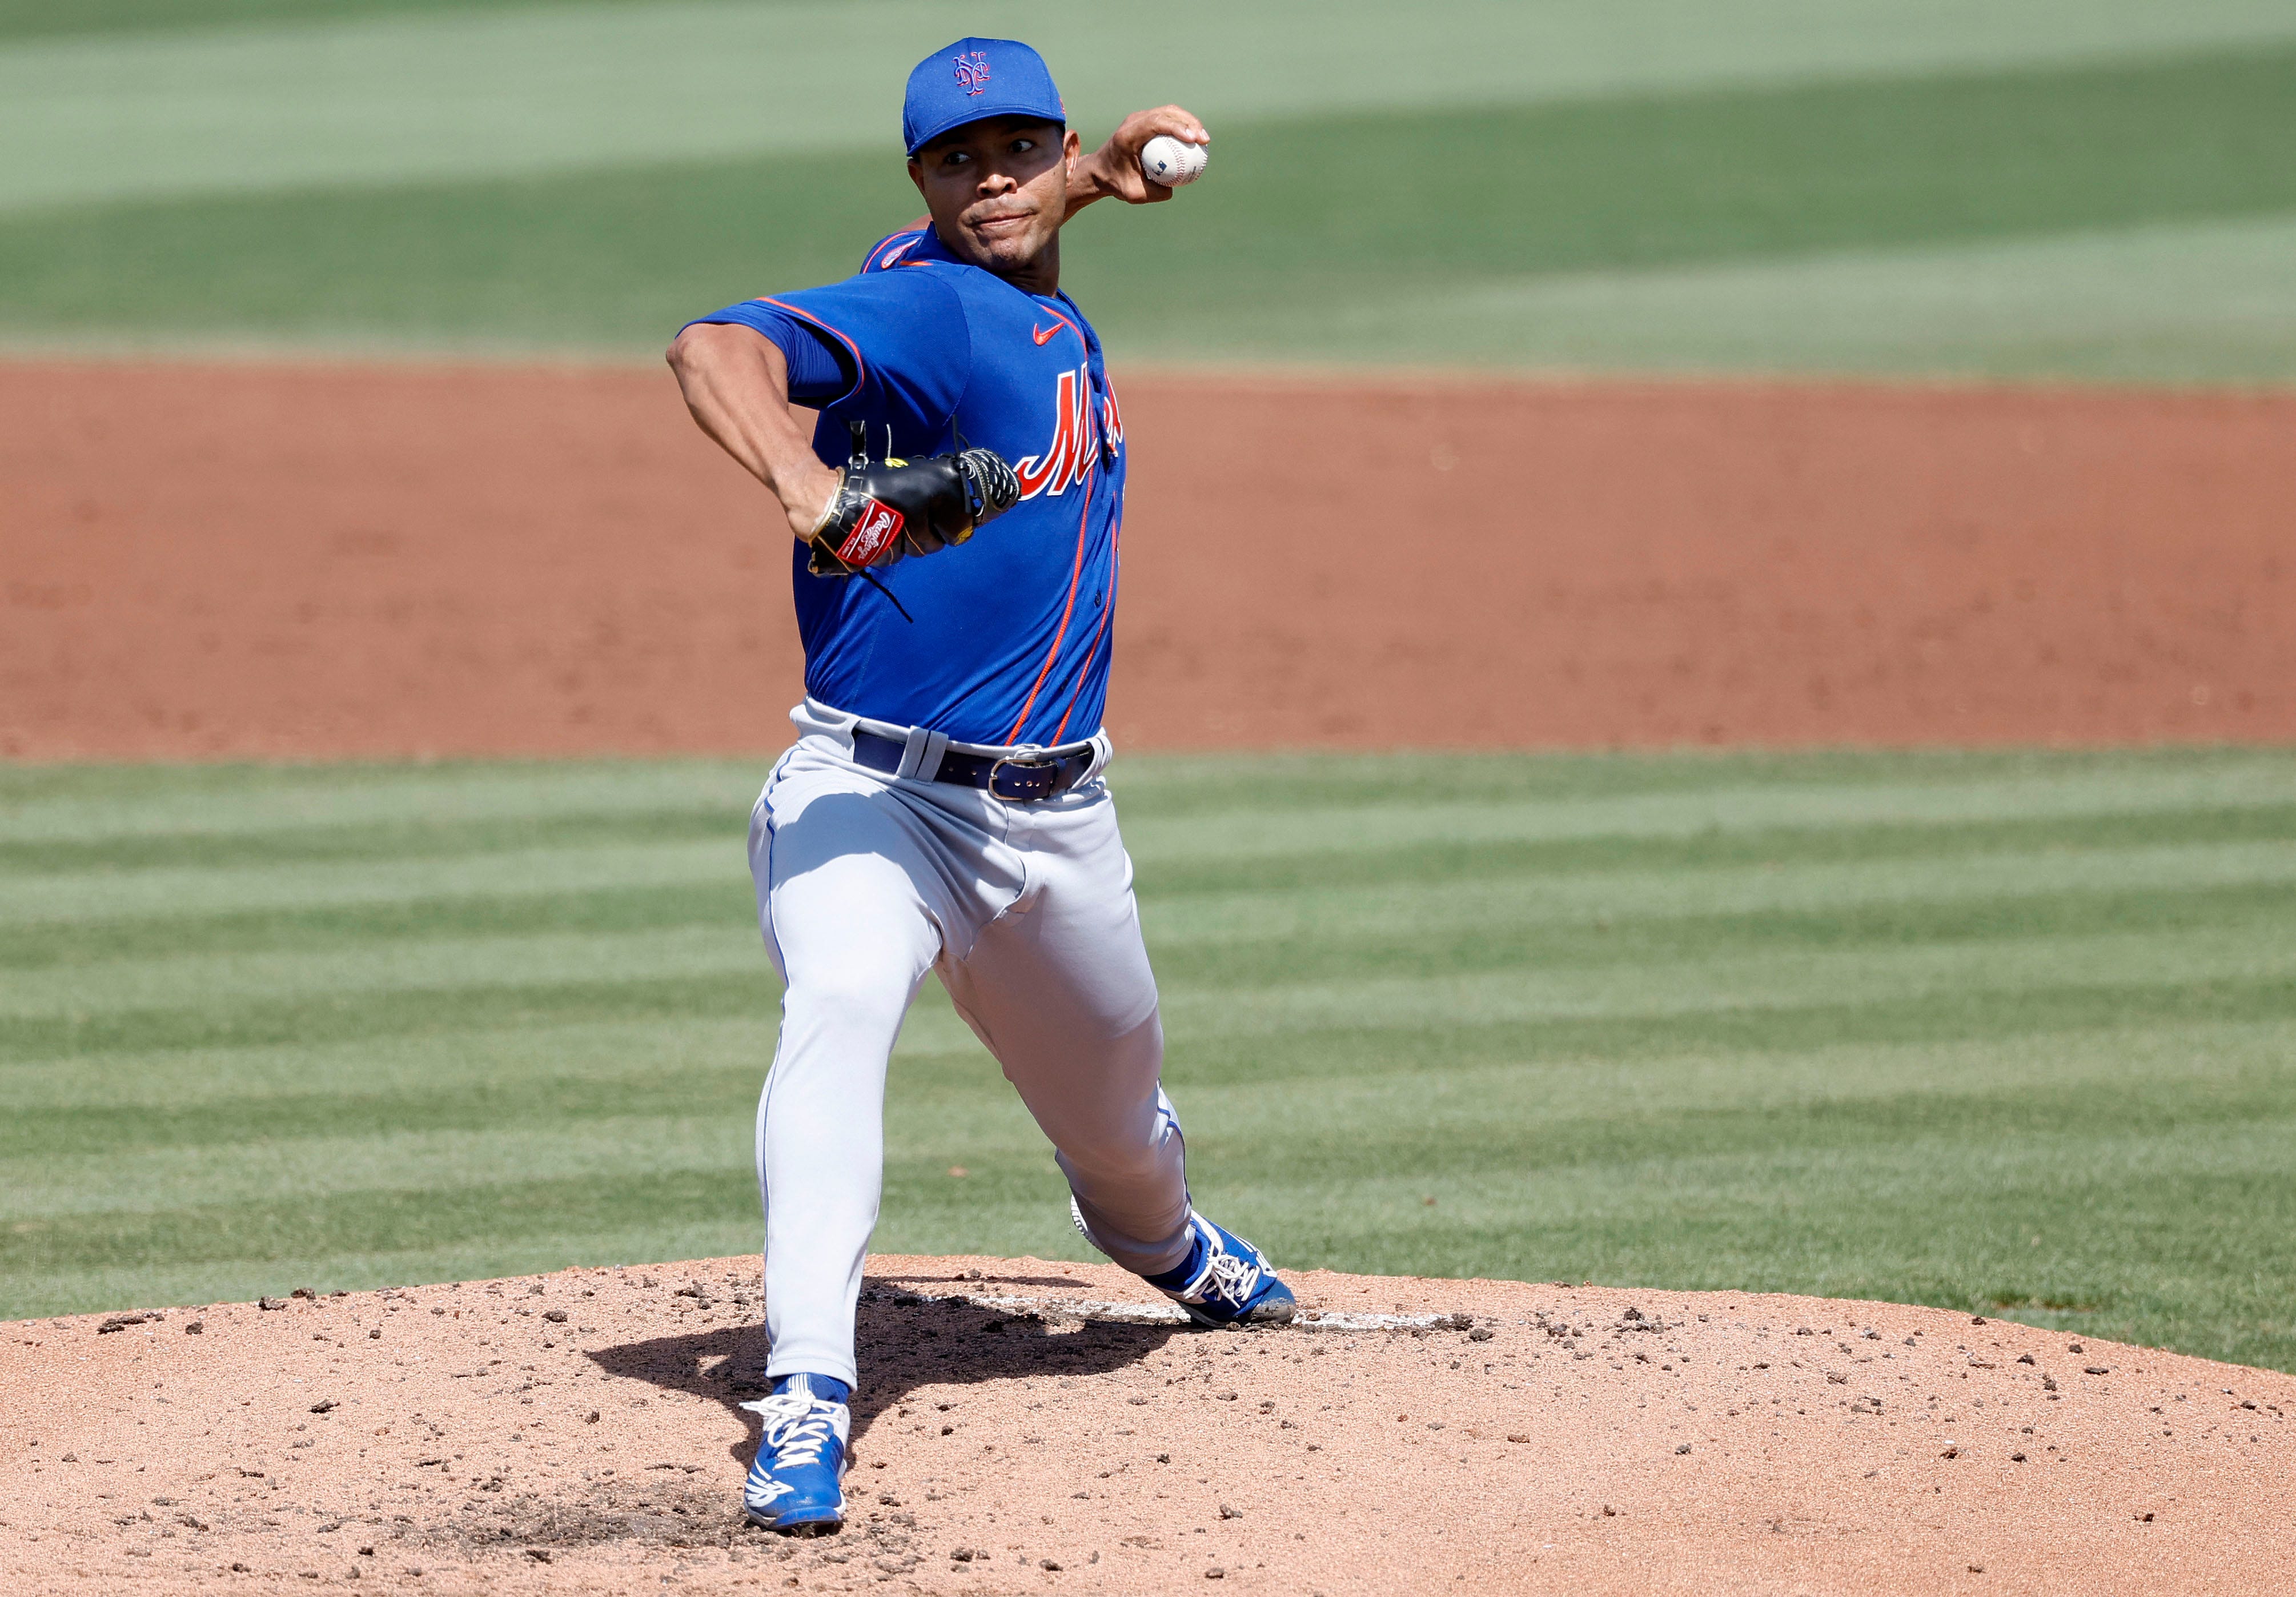 Jose Quintana on Mets debut: 'Every inning feels better and better